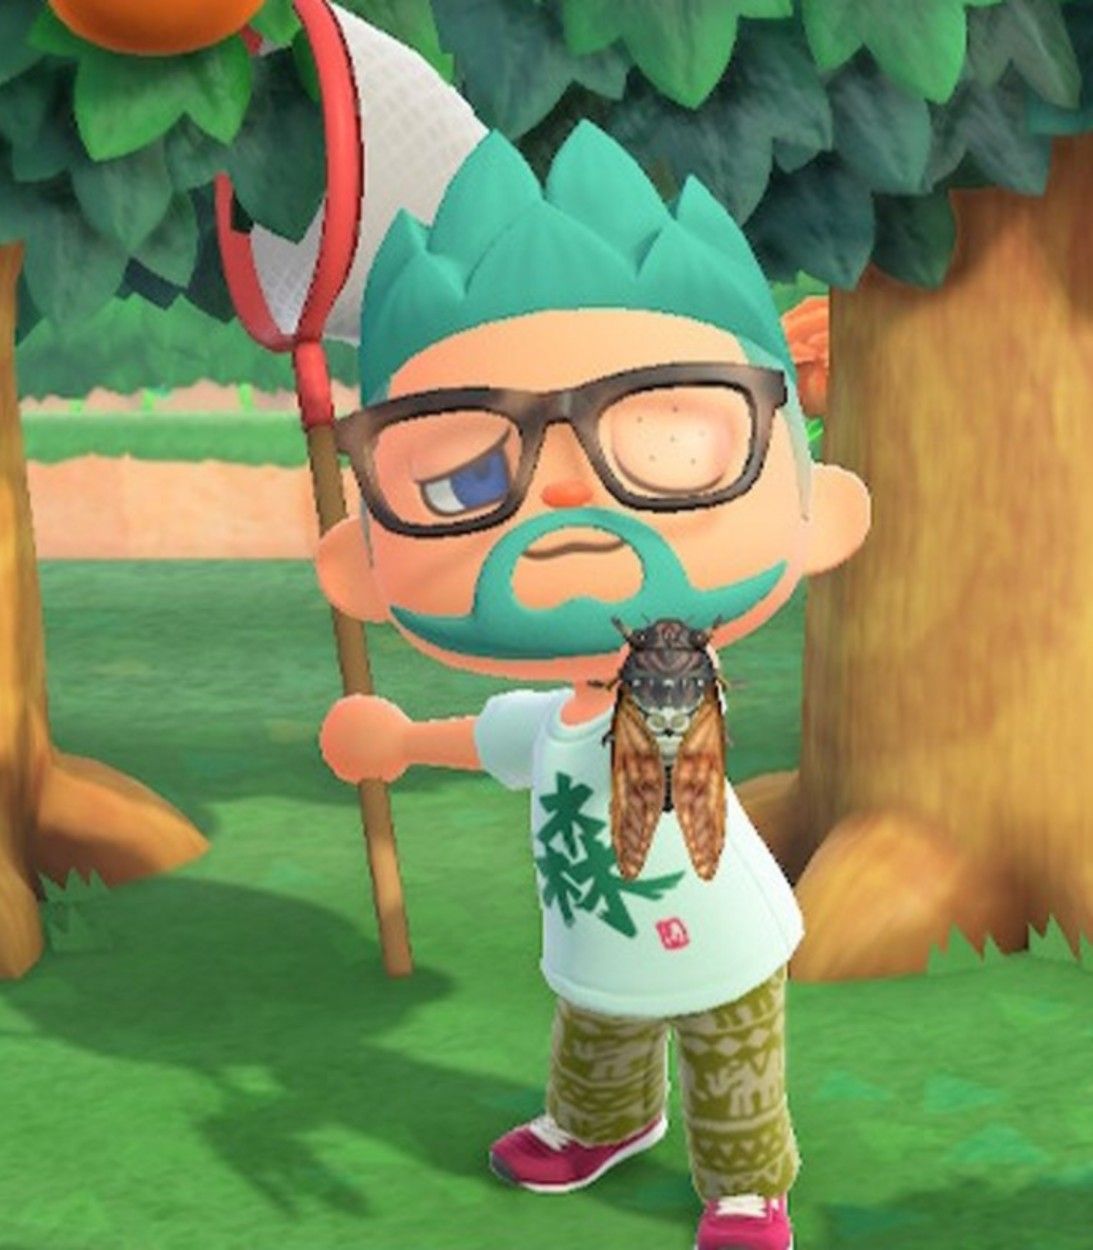 A player catches a Brown Cicada in Animal Crossing: New Horizons